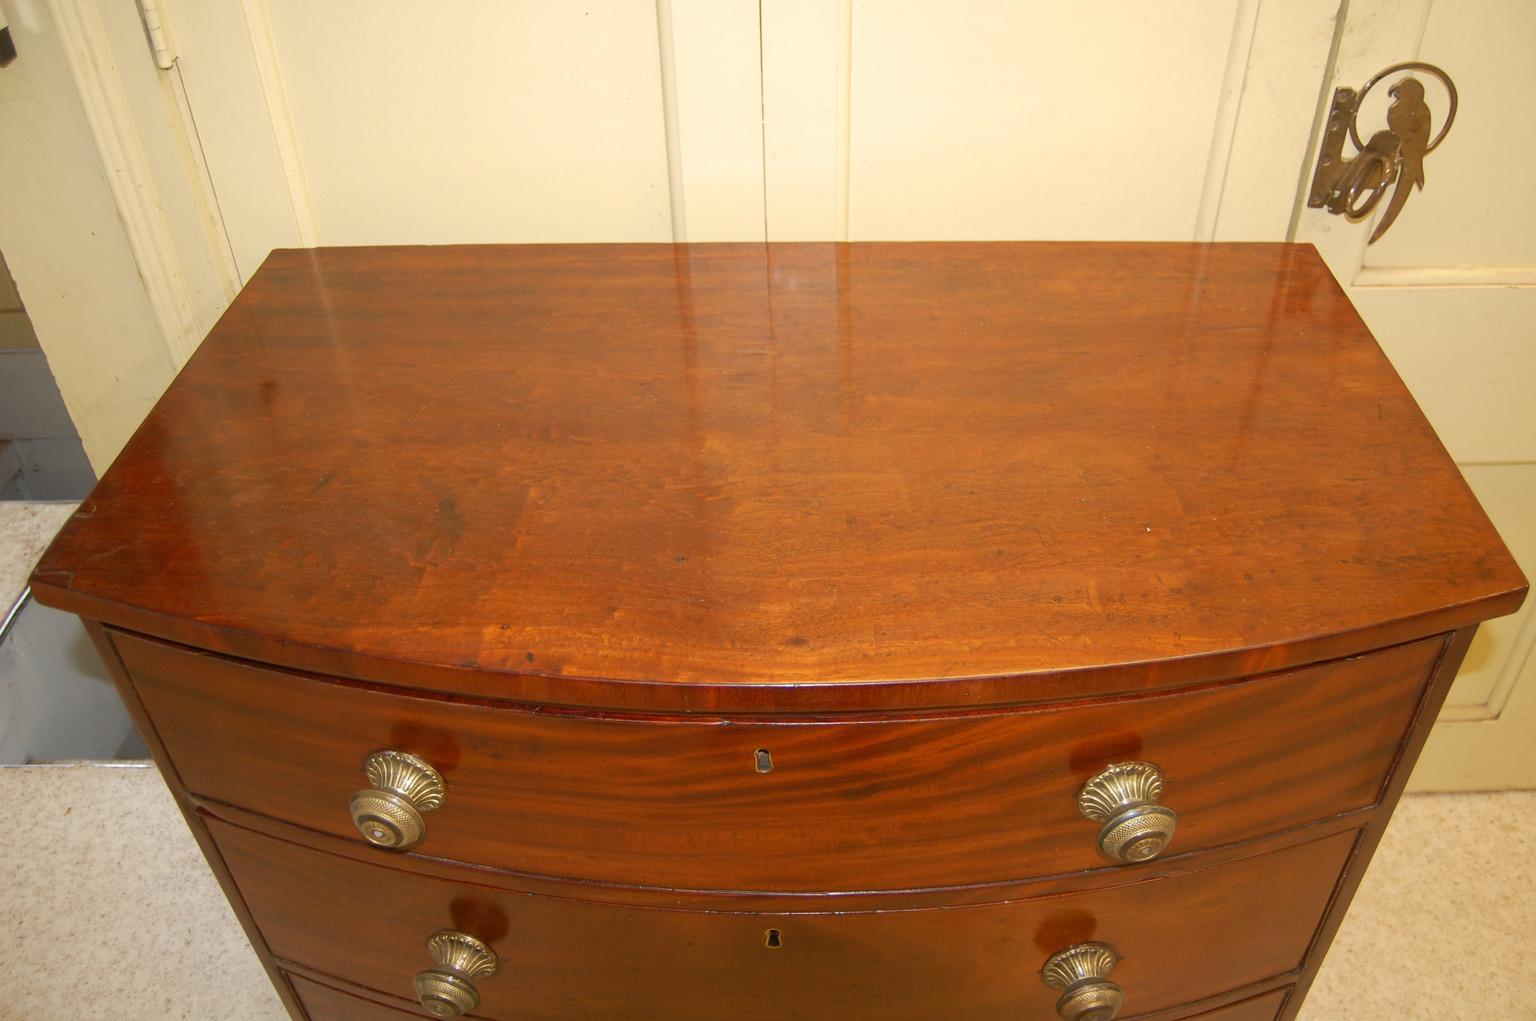  English Georgian mahogany bowfront chest of three drawers with French feet and diamond shaped stringing on a boxwood ground.  The skirt is shaped on all three sides and is set off by the inlaid stringing with a diamond motif.  The drawers have